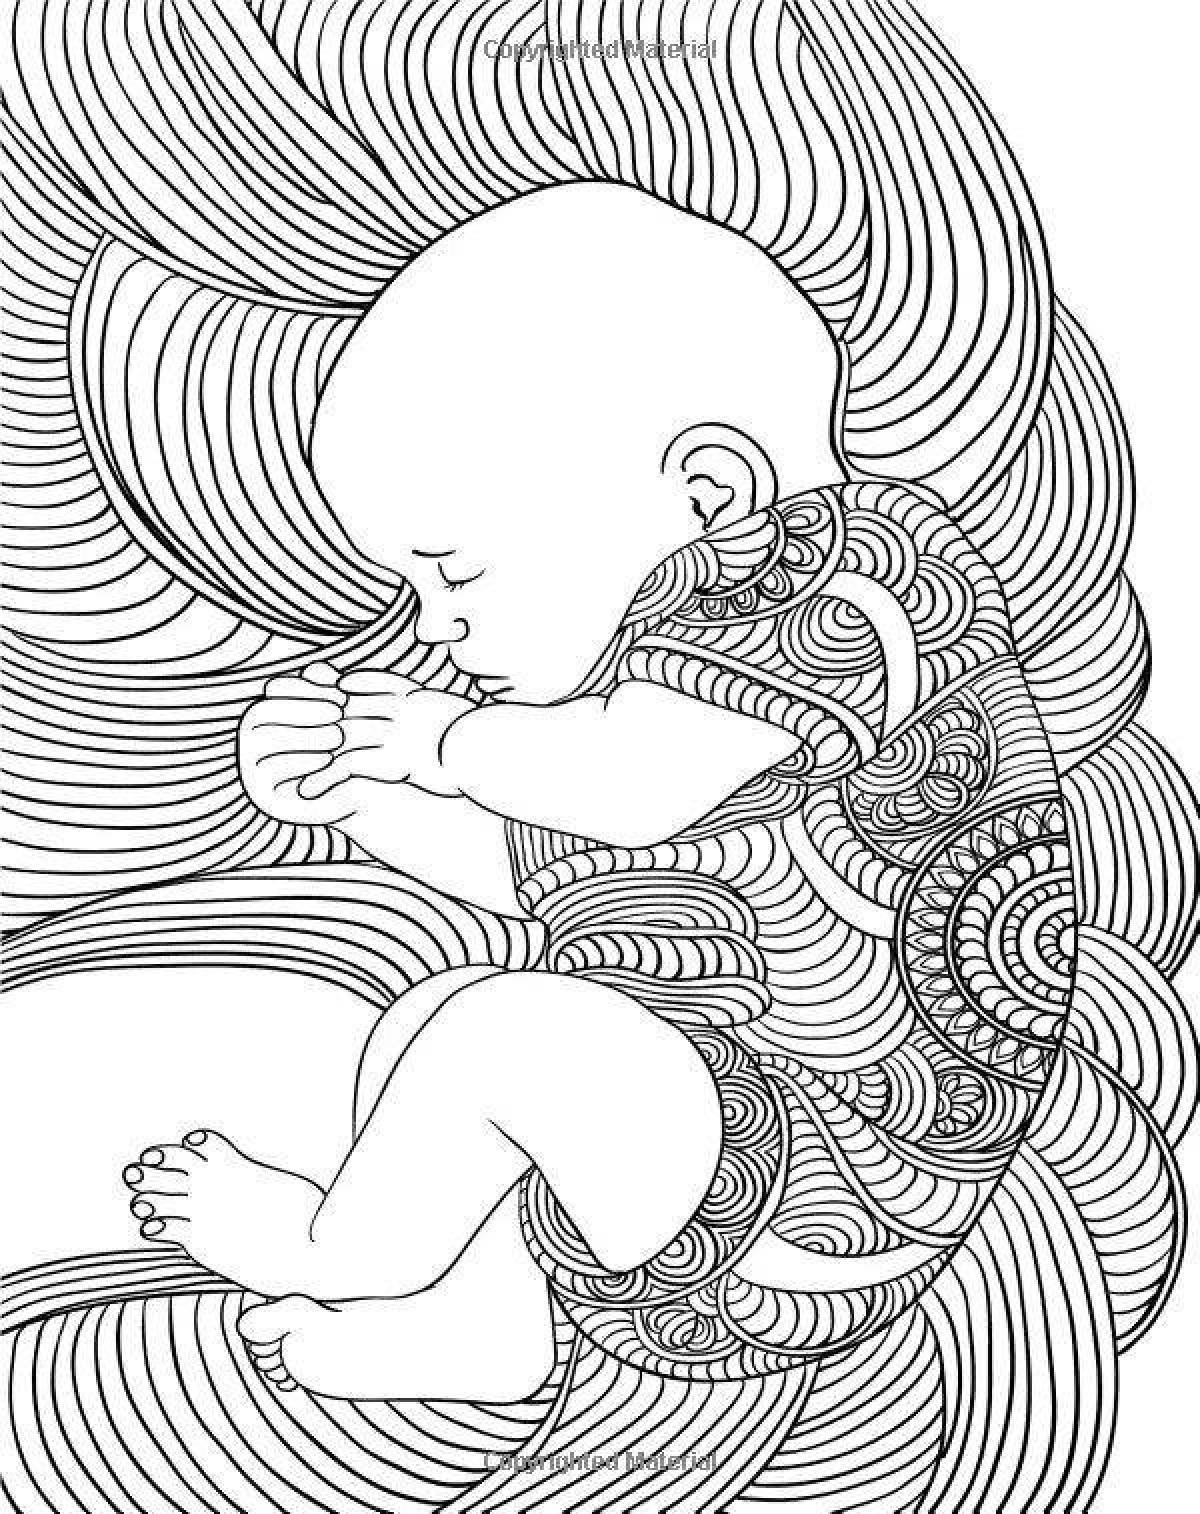 Relaxing coloring book for pregnant women anti-stress